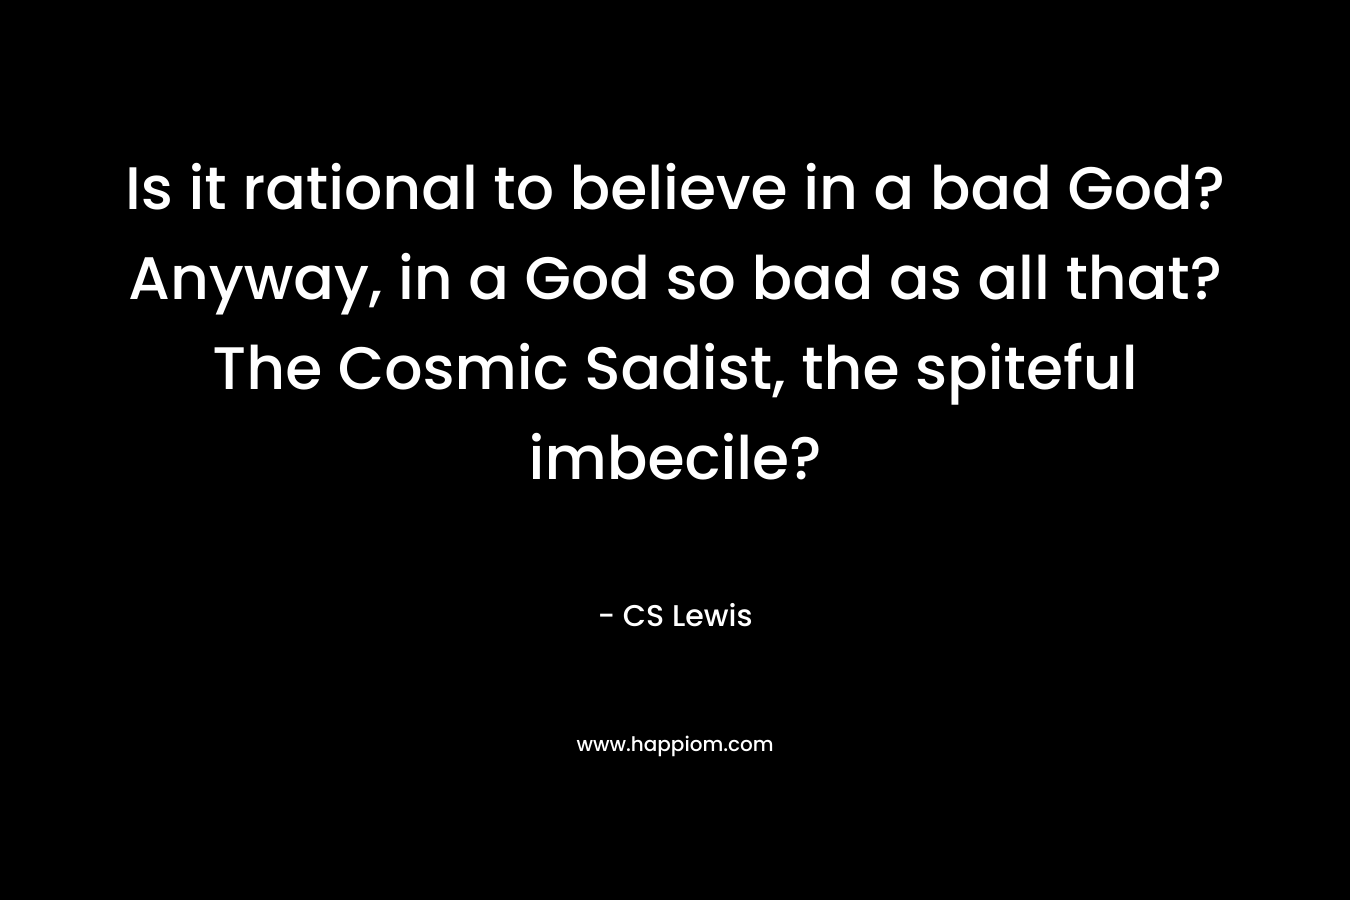 Is it rational to believe in a bad God? Anyway, in a God so bad as all that? The Cosmic Sadist, the spiteful imbecile? – CS Lewis